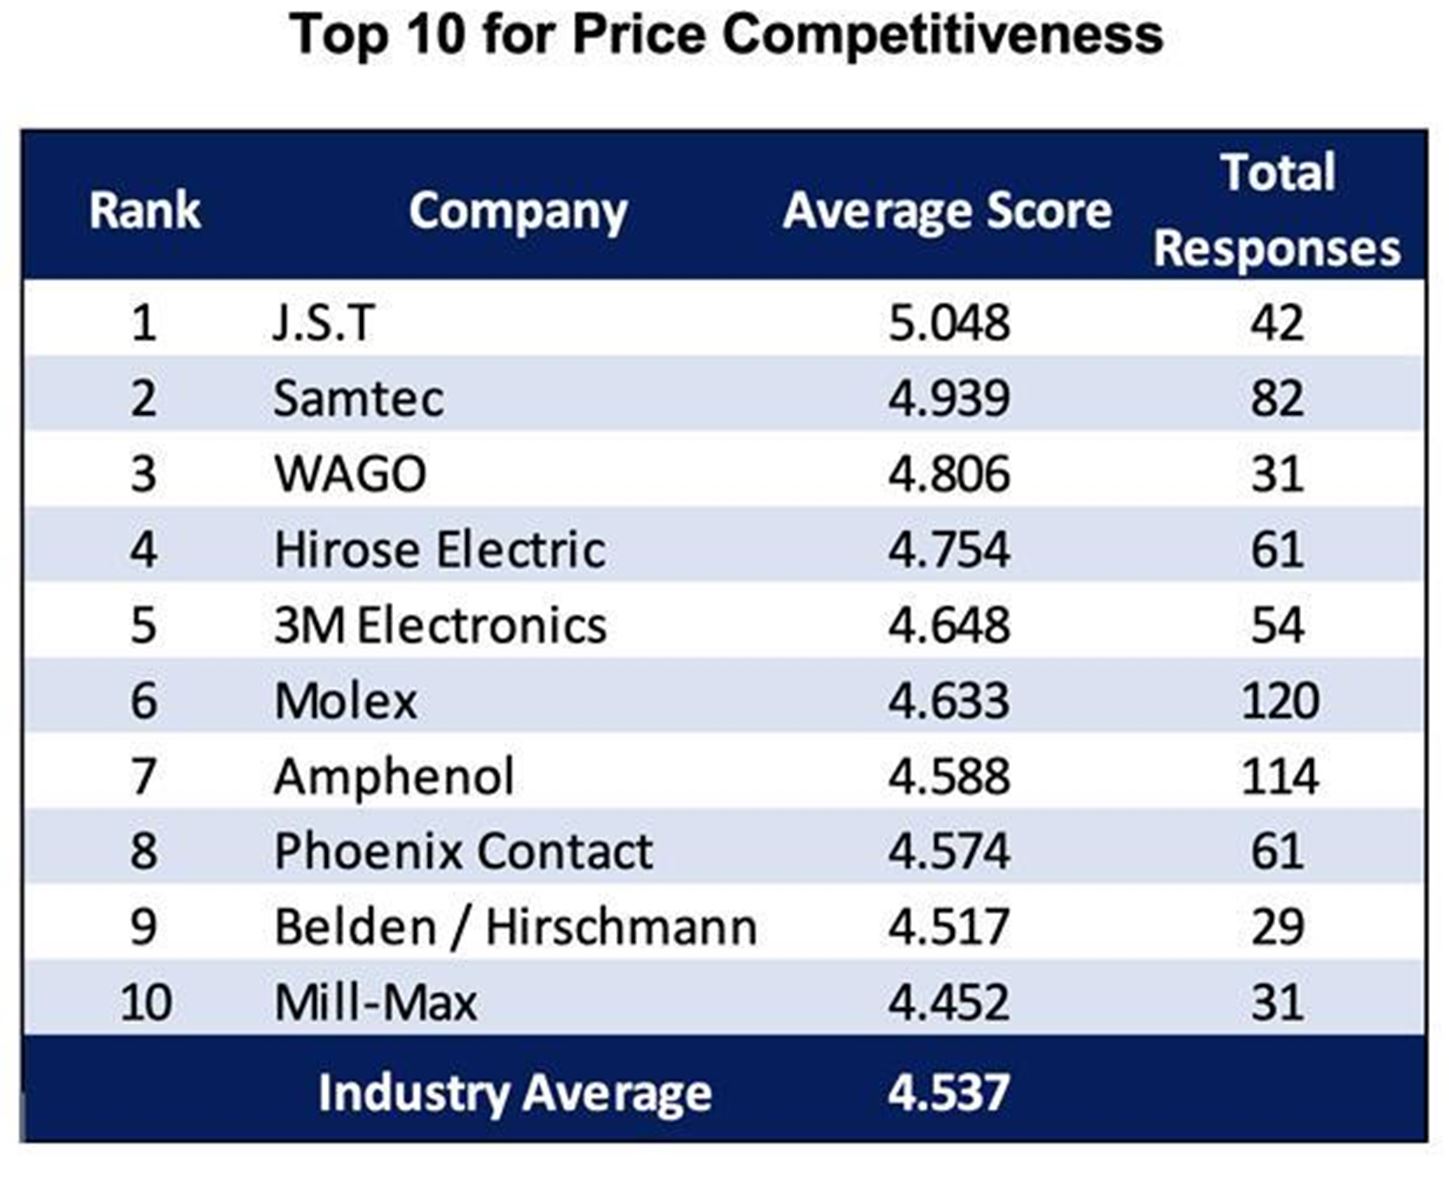 2021 top 10 price competitiveness